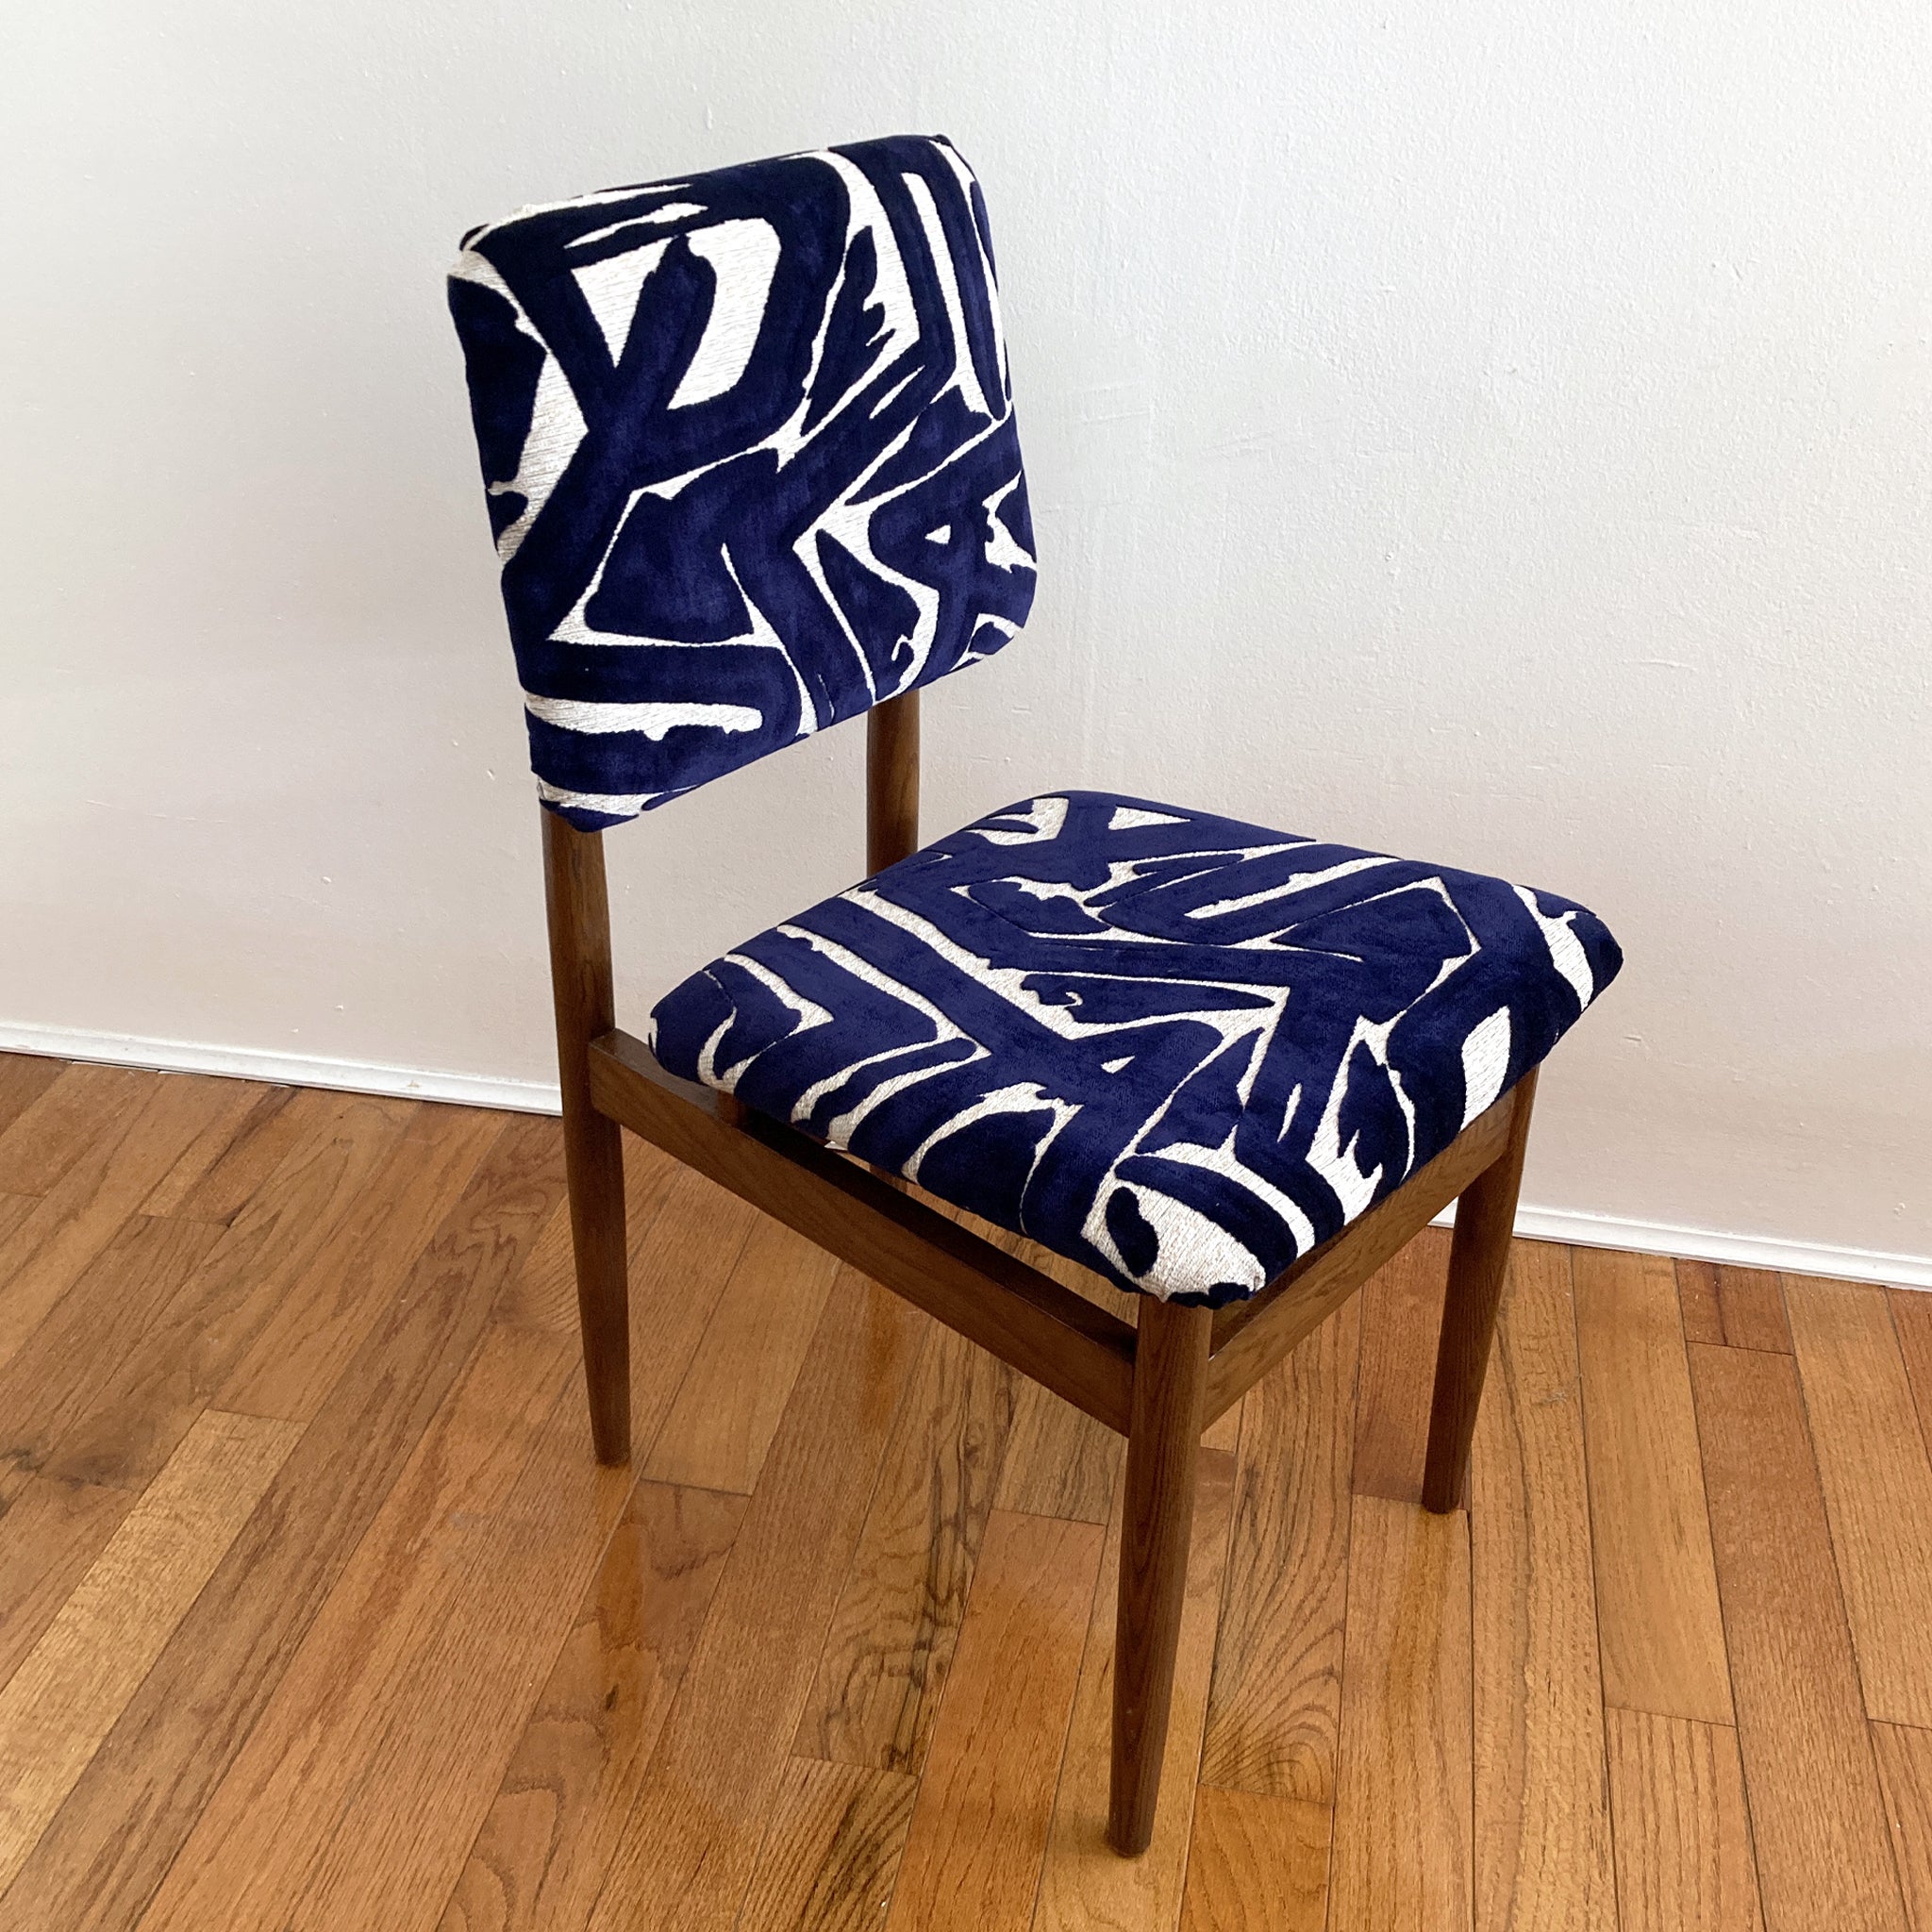 Beautiful midcentury chair, in the style of Arne Vodder. Oak frame, seat and back reupholstered with indigo and ecru fabric, the raised velvet indigo pattern absolutely glows. Structurally sound, comfortable.

In good vintage condition, minor